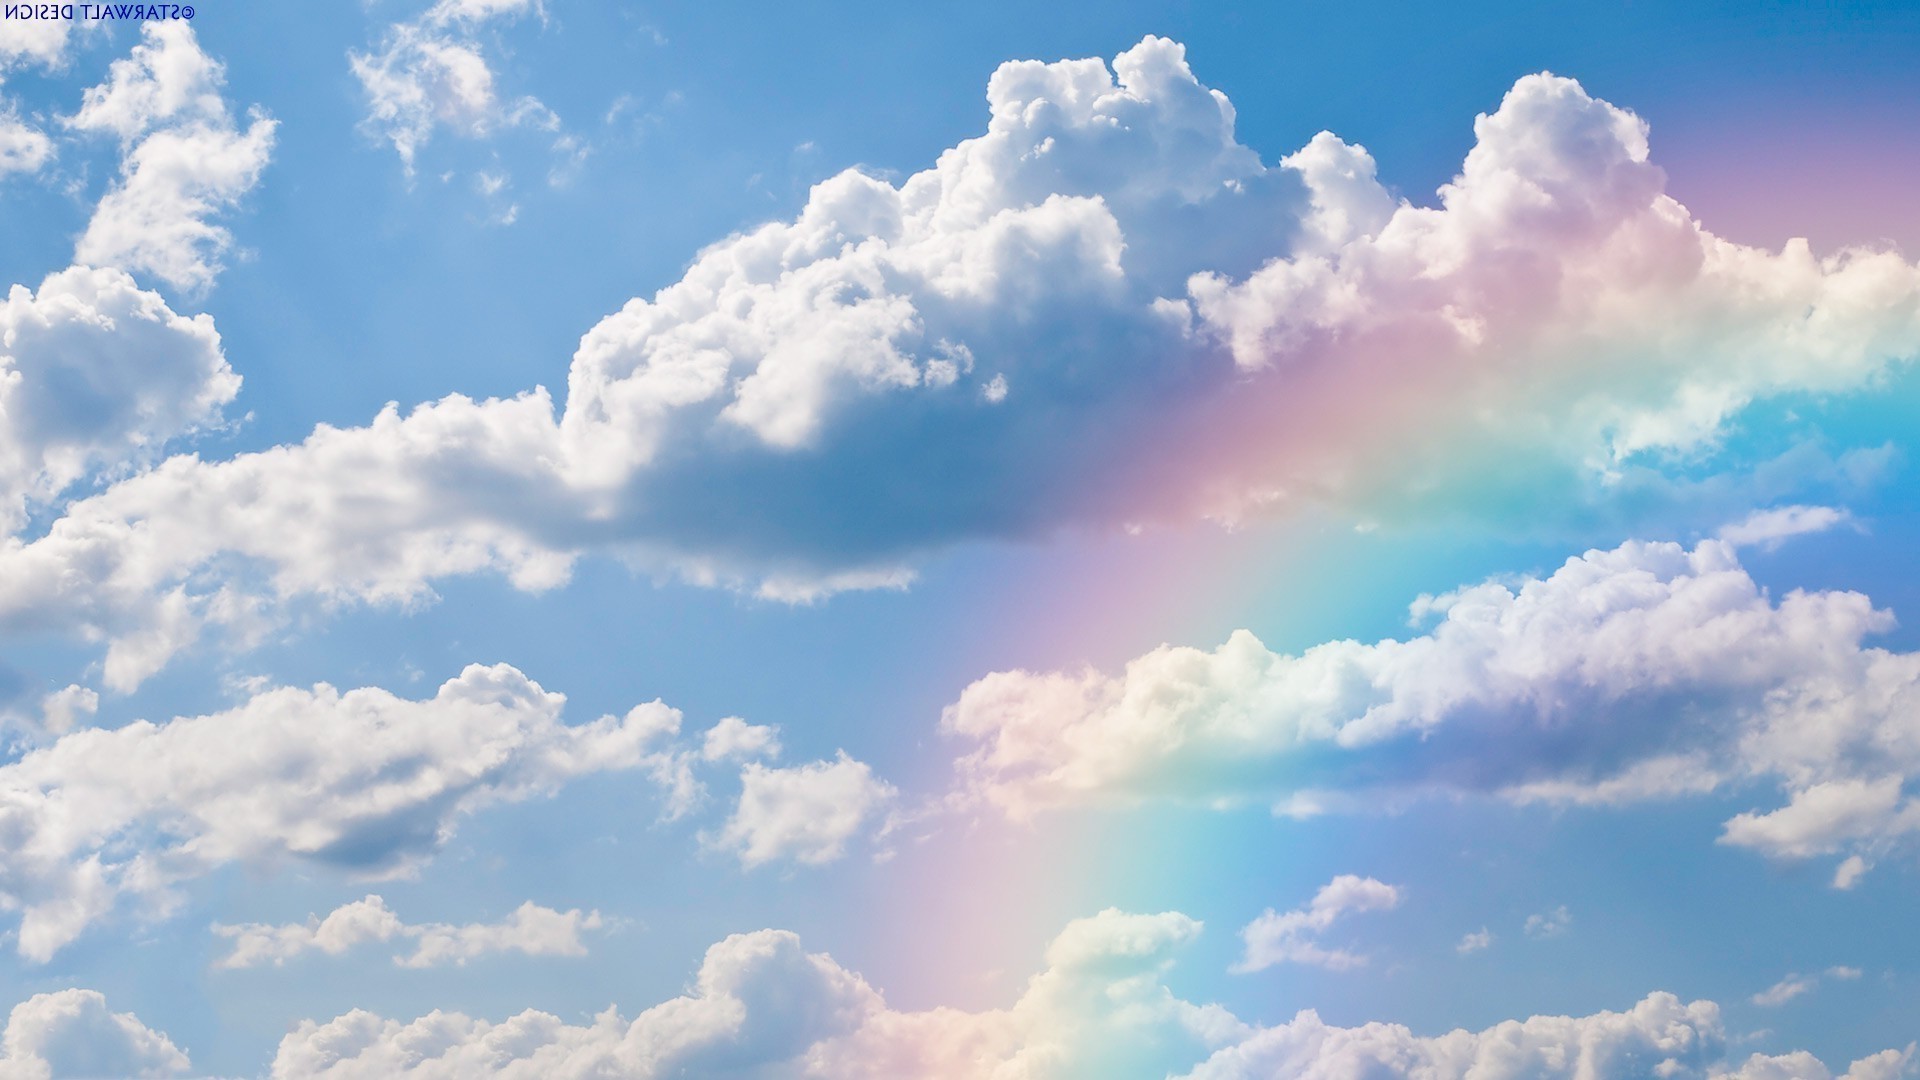 Rainbow in the clouds wallpaper 15621 1920x1080